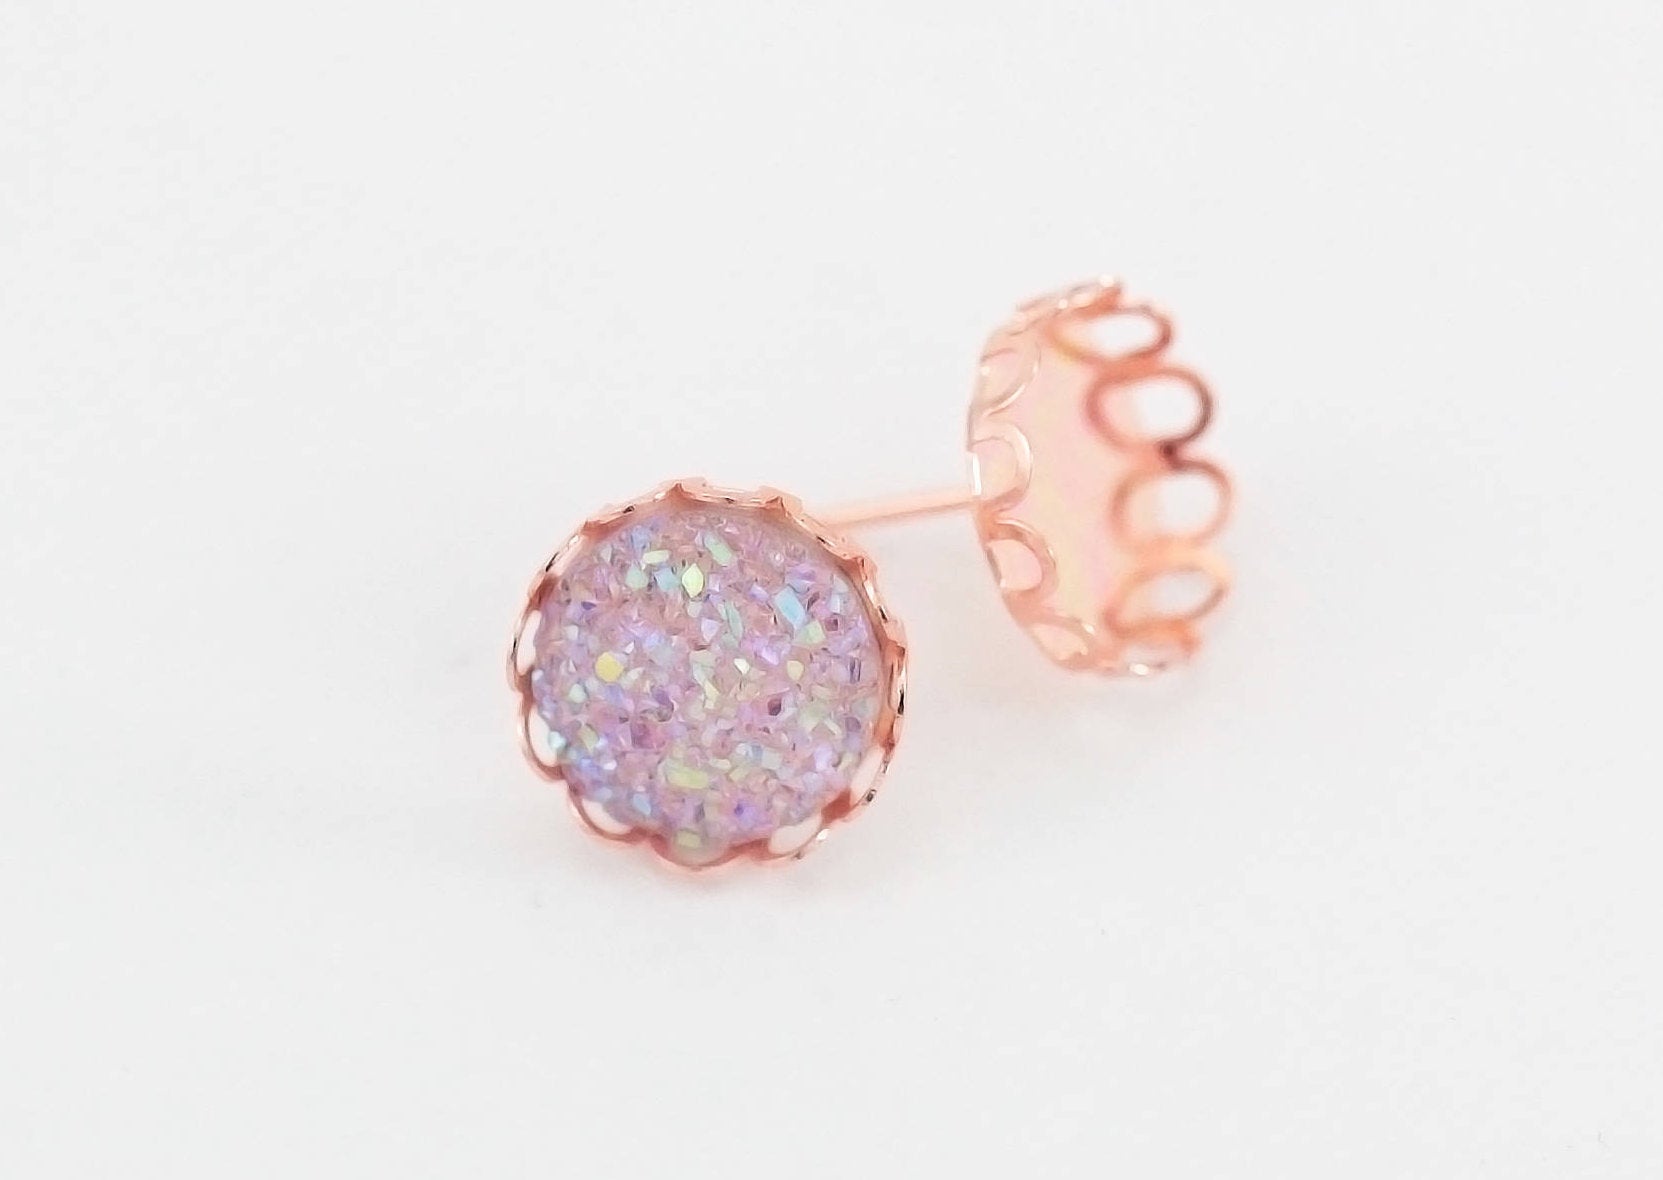 2 pairs, 12mm Rose Gold Plated // Earstud with curved border // Blank/Base // Fit 12mm Glass Cabochons // Buttons